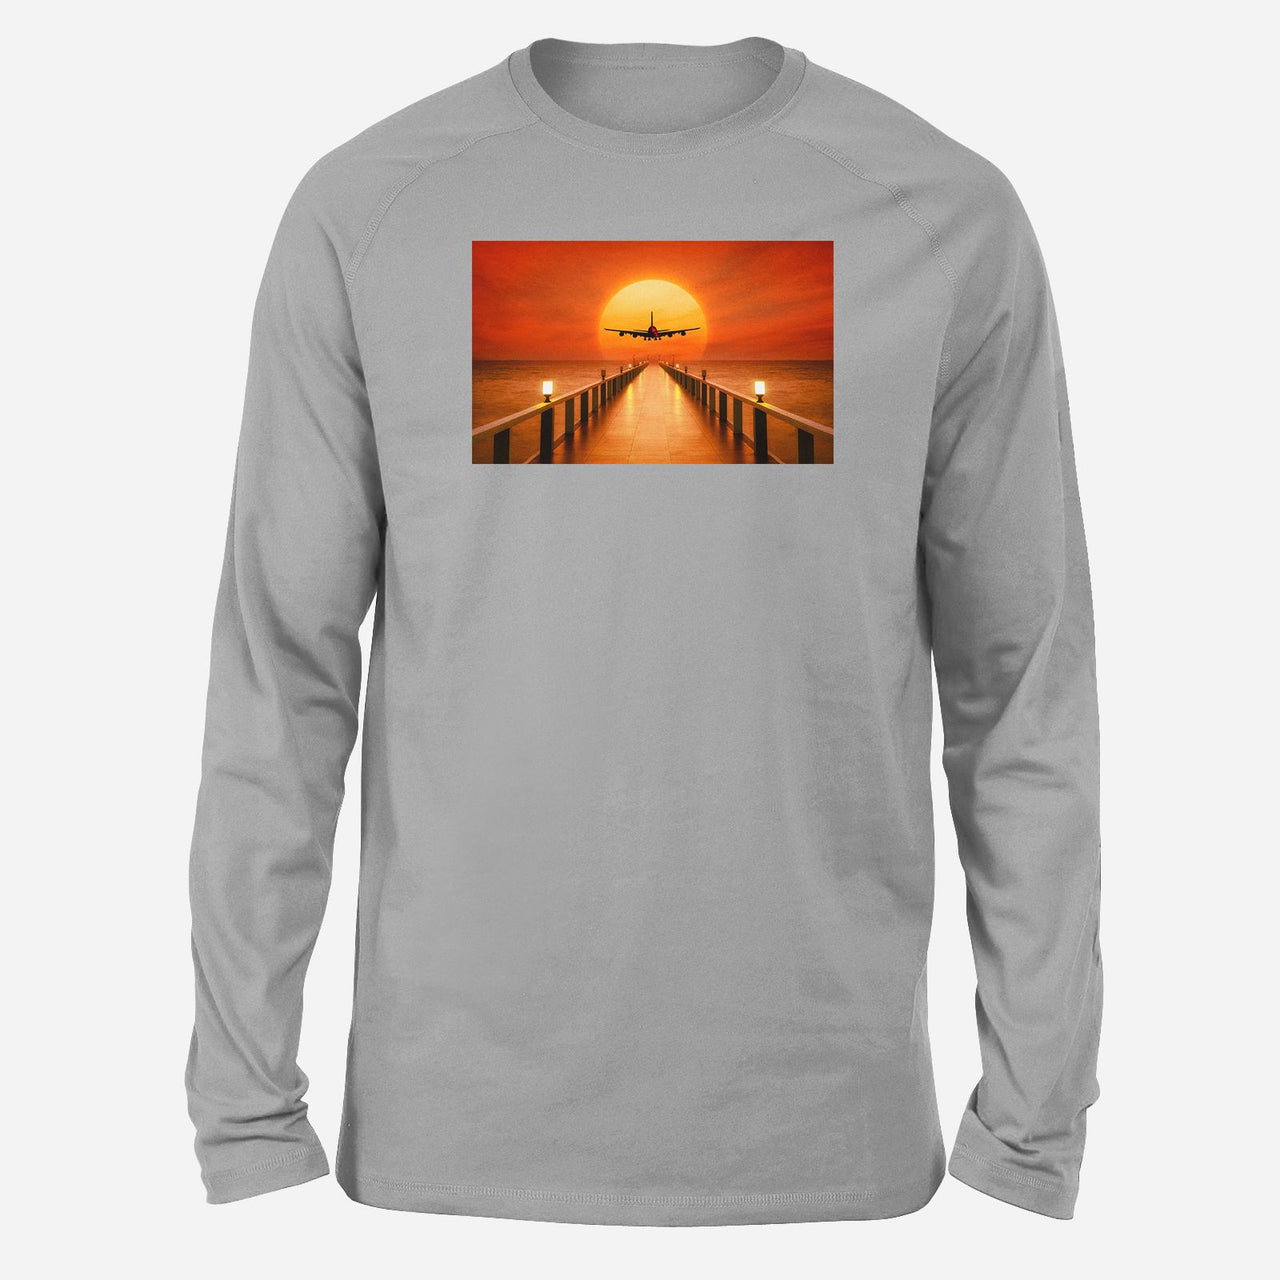 Airbus A380 Towards Sunset Designed Long-Sleeve T-Shirts